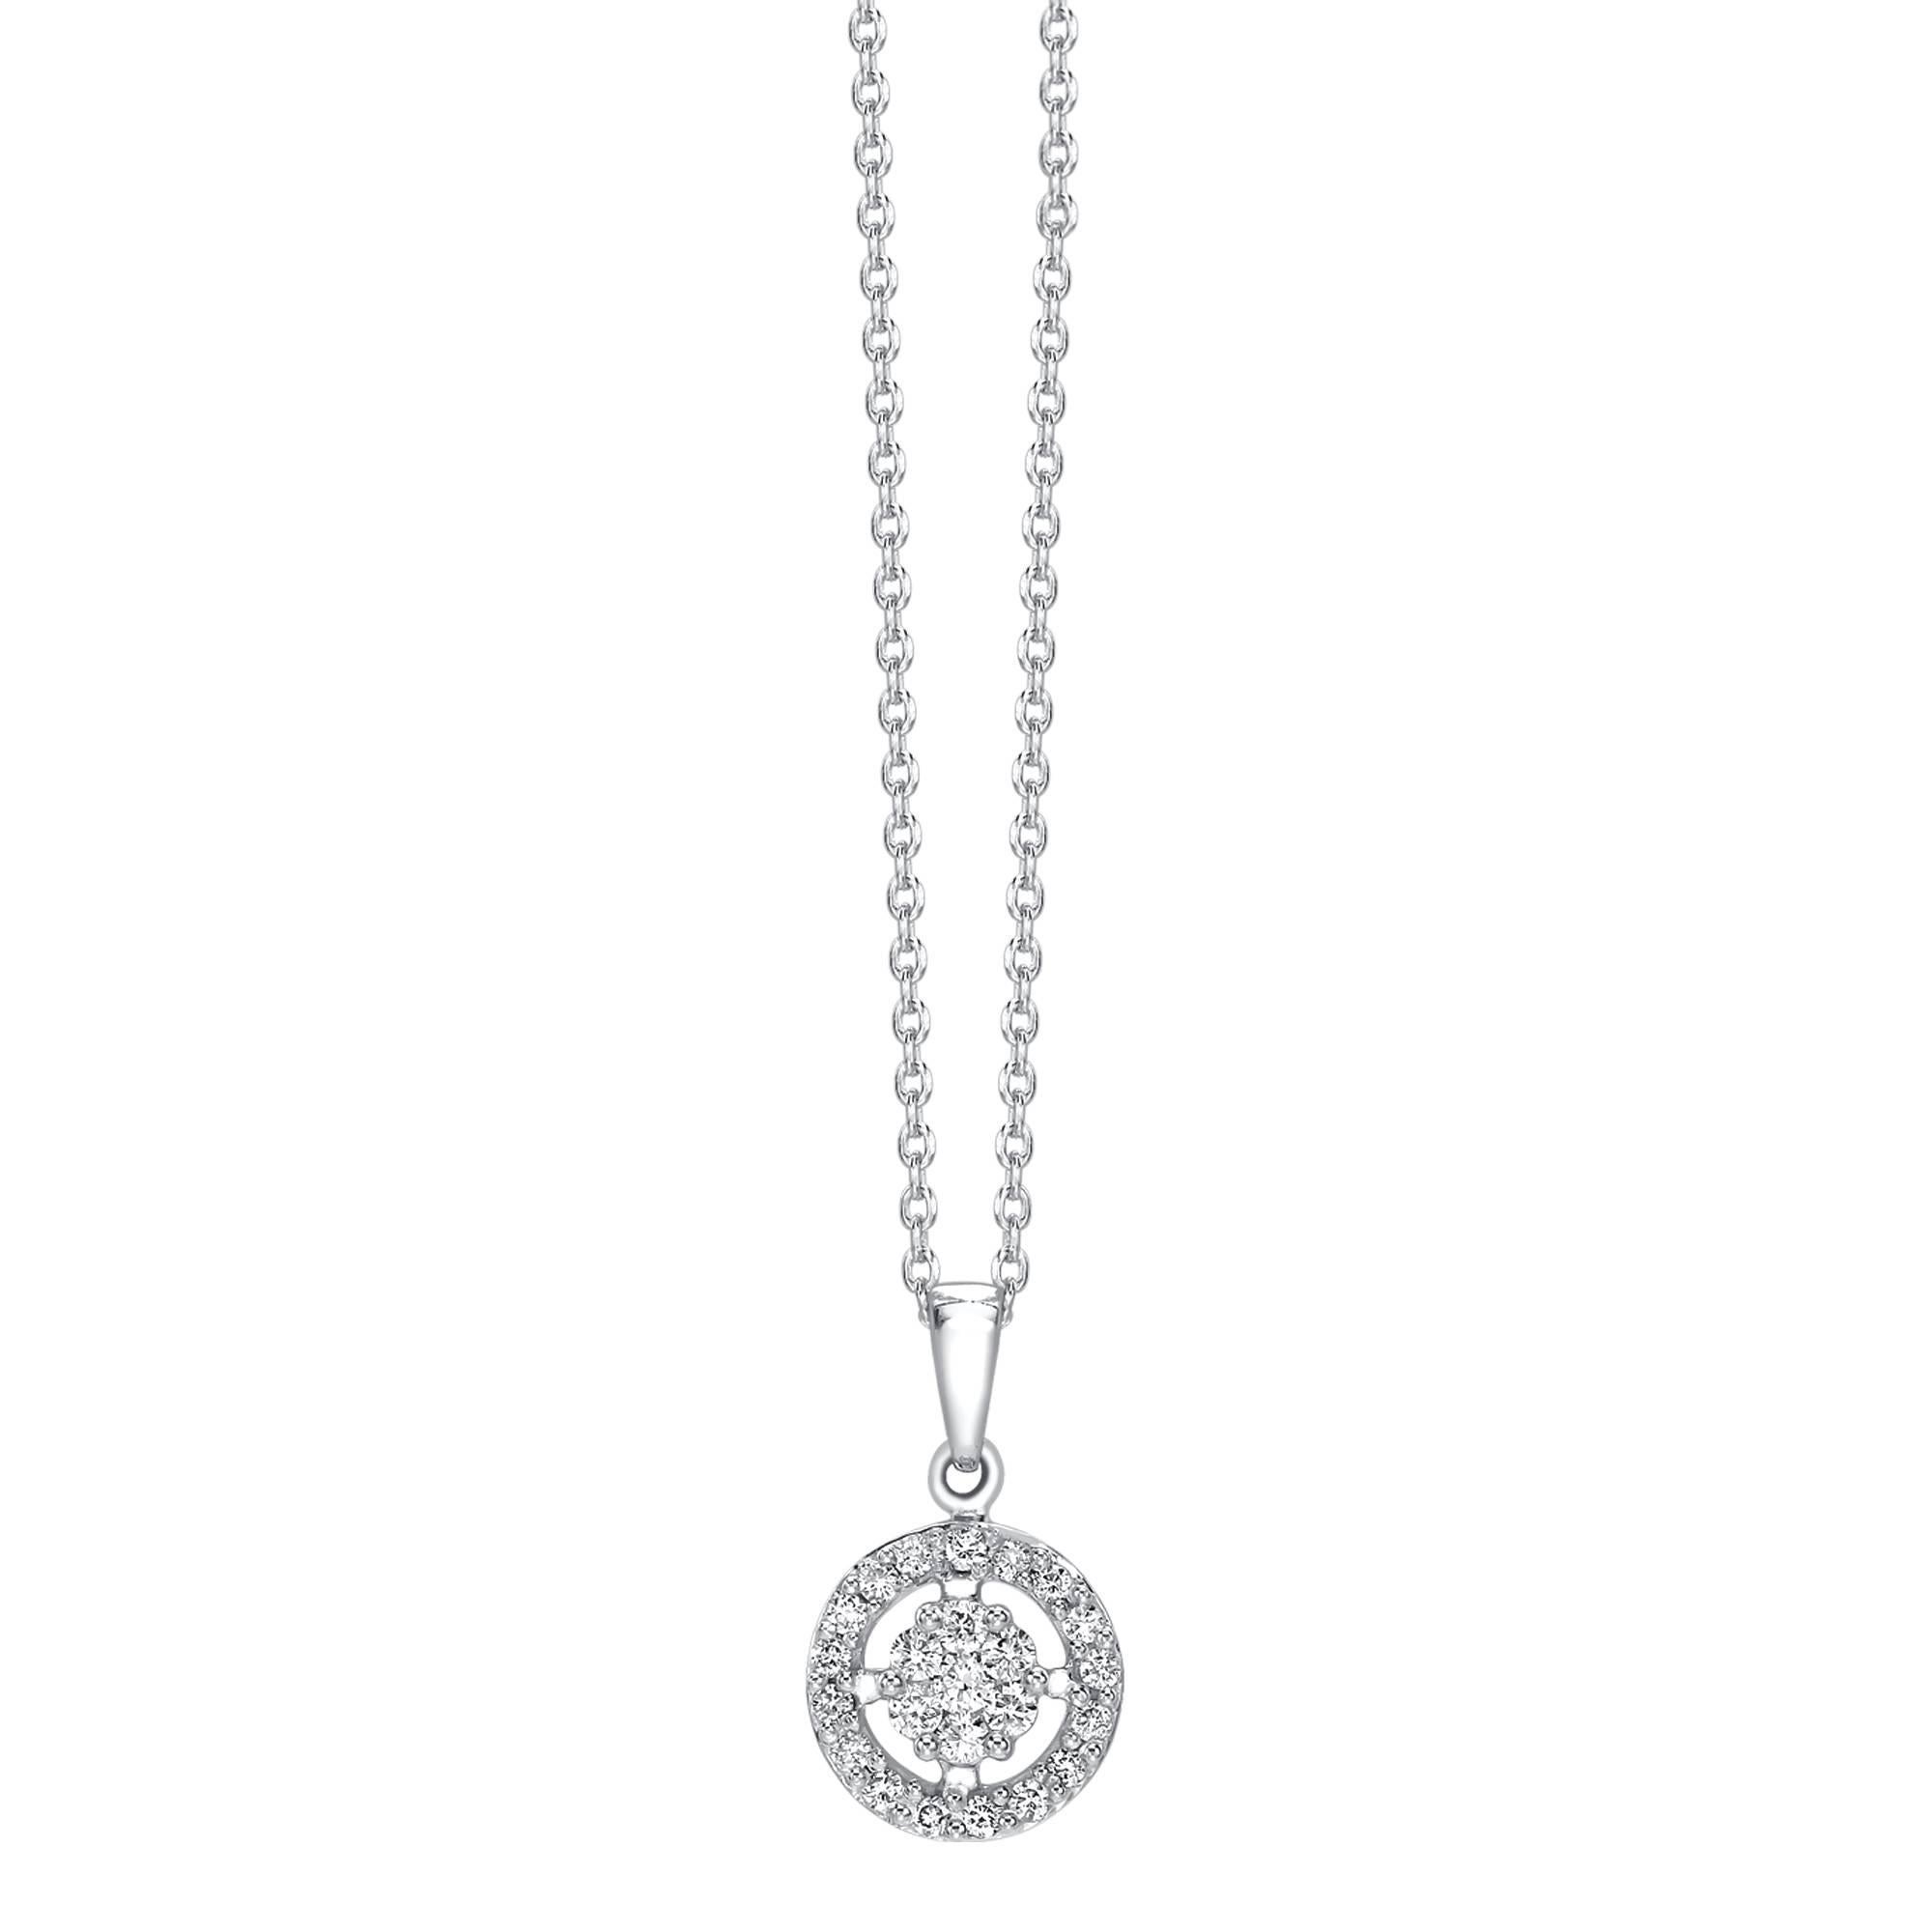 A Round Brilliant Diamond is surrounded by a halo of Glistening Diamonds. Simple but elegant this pendant is paired with a 18 Karat White Gold chain. The total Diamond weight is 0.35 Carat. With a diameter of 10mm this pendant weighs 2.8grams. This